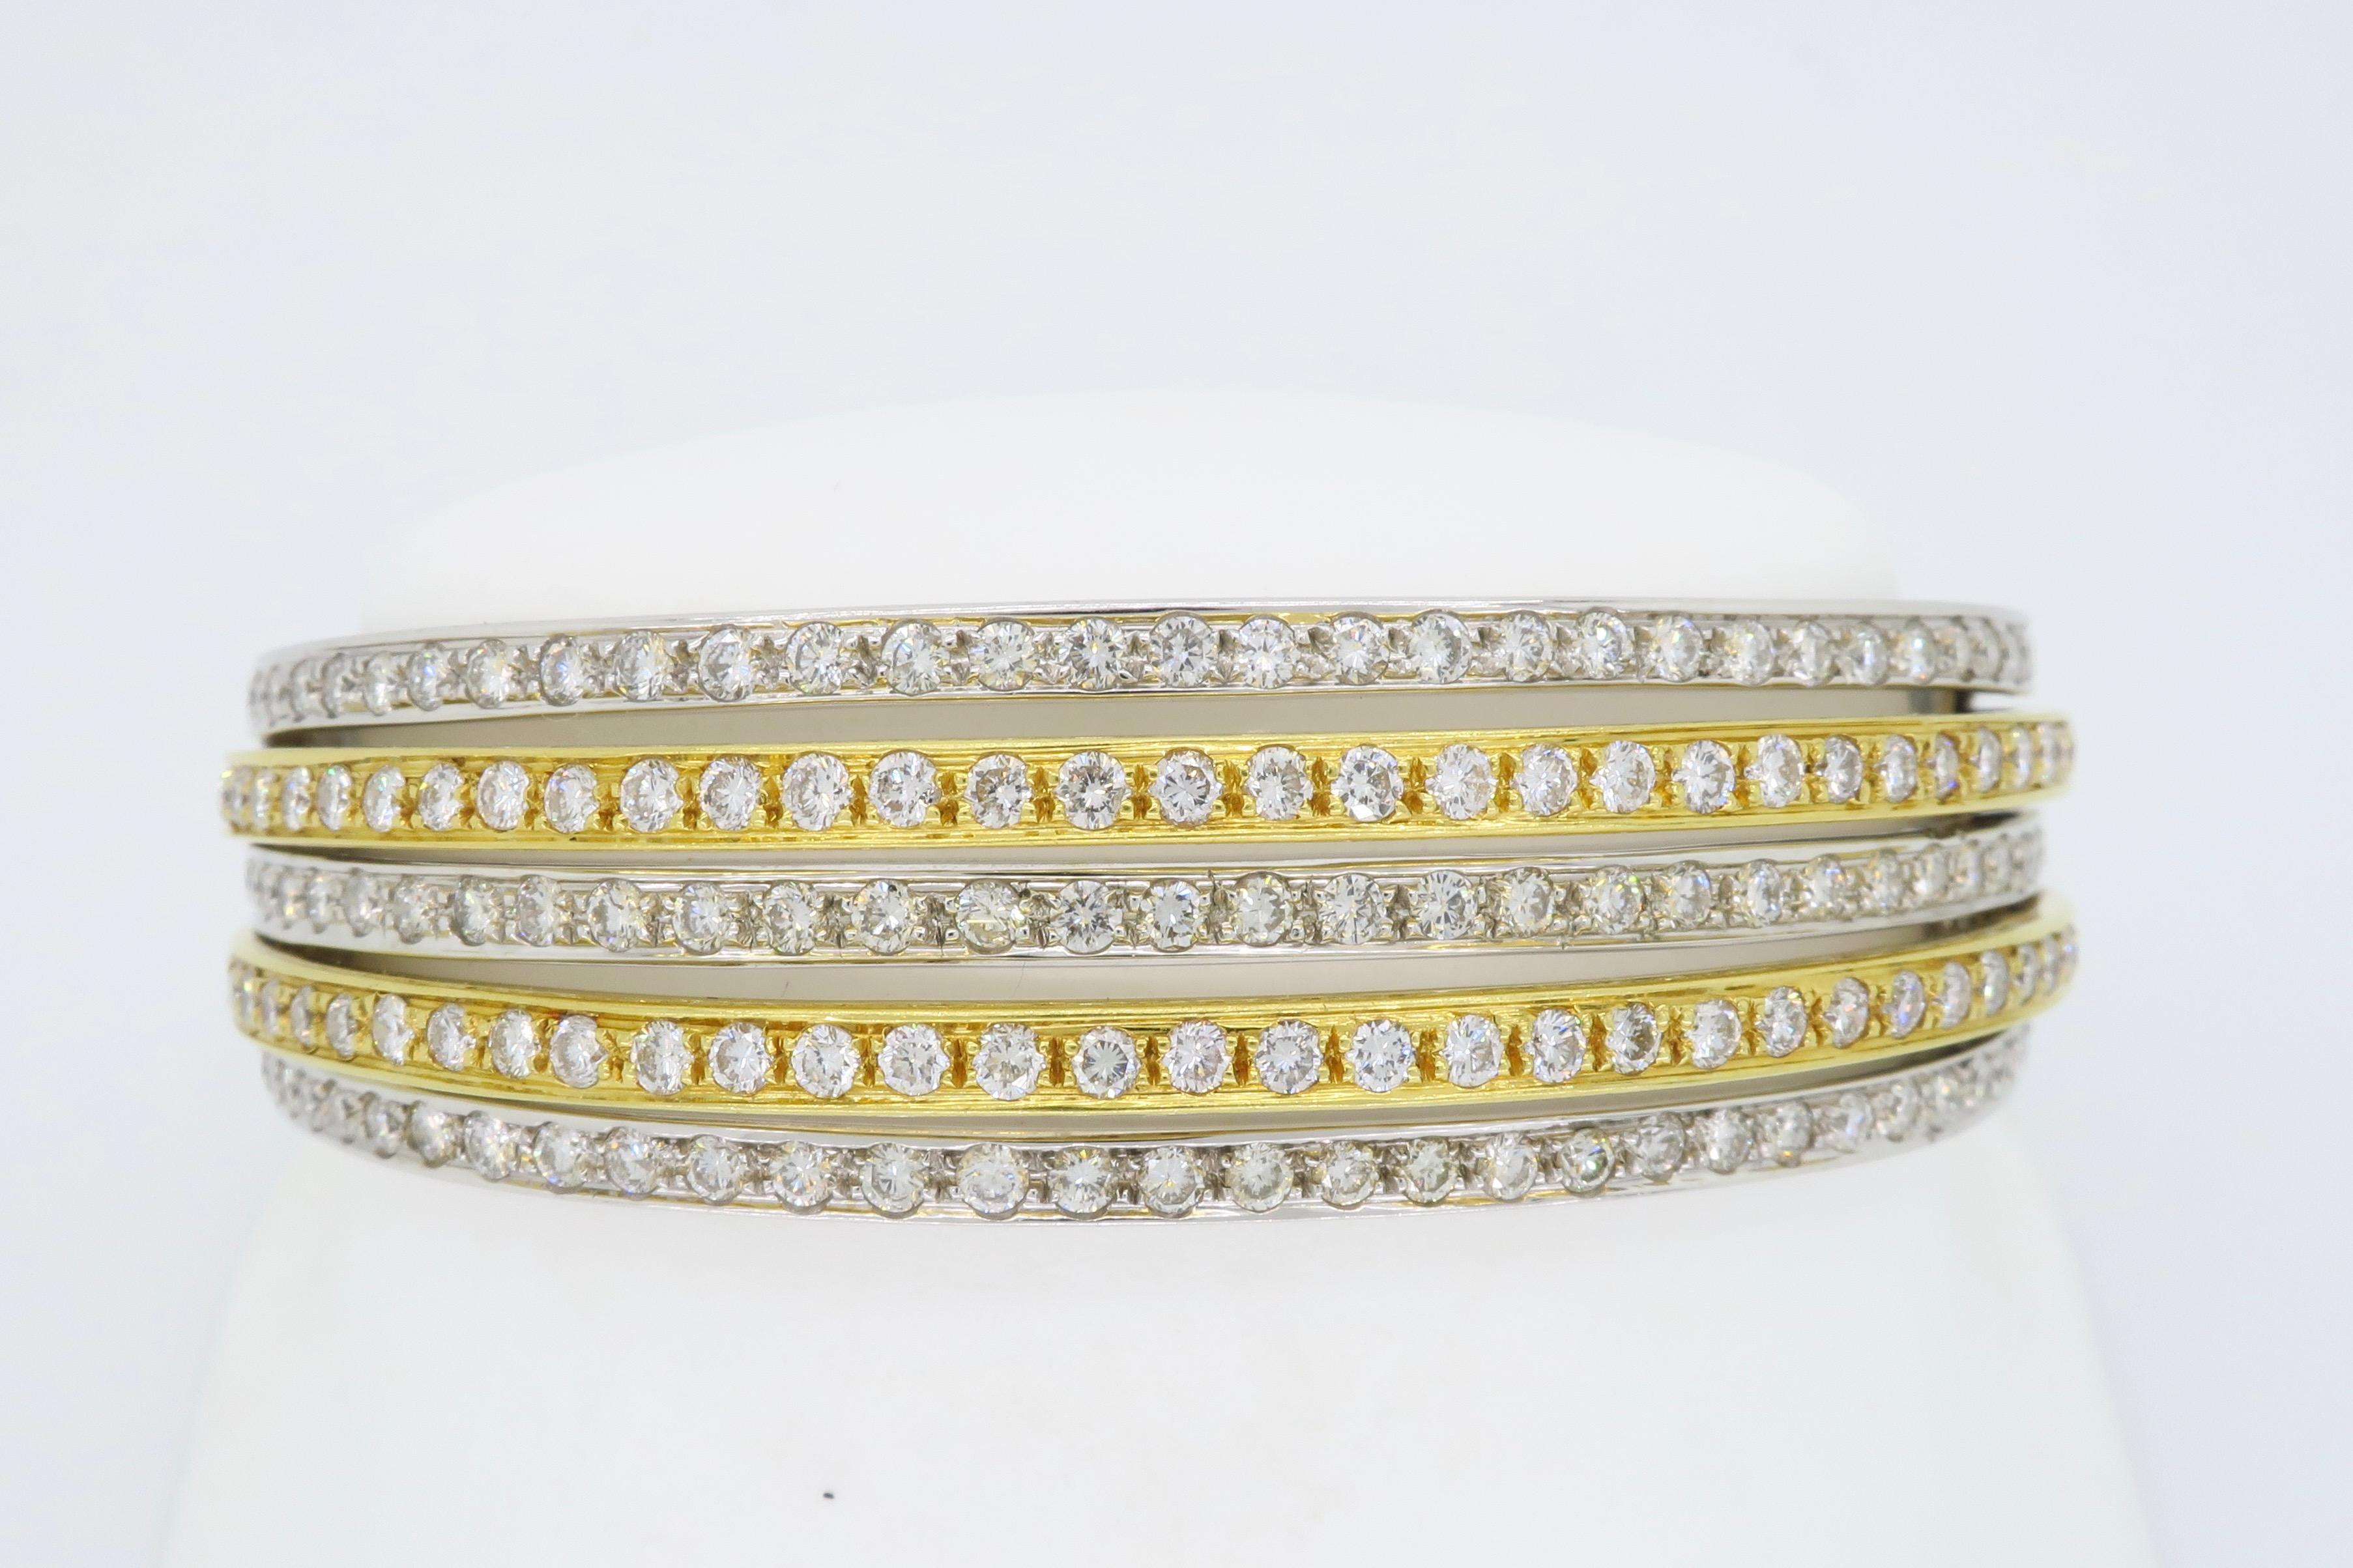 Unique 18k two tone gold diamond bangle featuring 5 elegant rows of Round Brilliant Cut Diamonds, totaling approximately 6.21CTW

Diamond Carat Weight: Approximately 6.21CTW
Diamond Cut: 183 Round Brilliant Cut Diamonds
Color: Average G-I
Clarity: